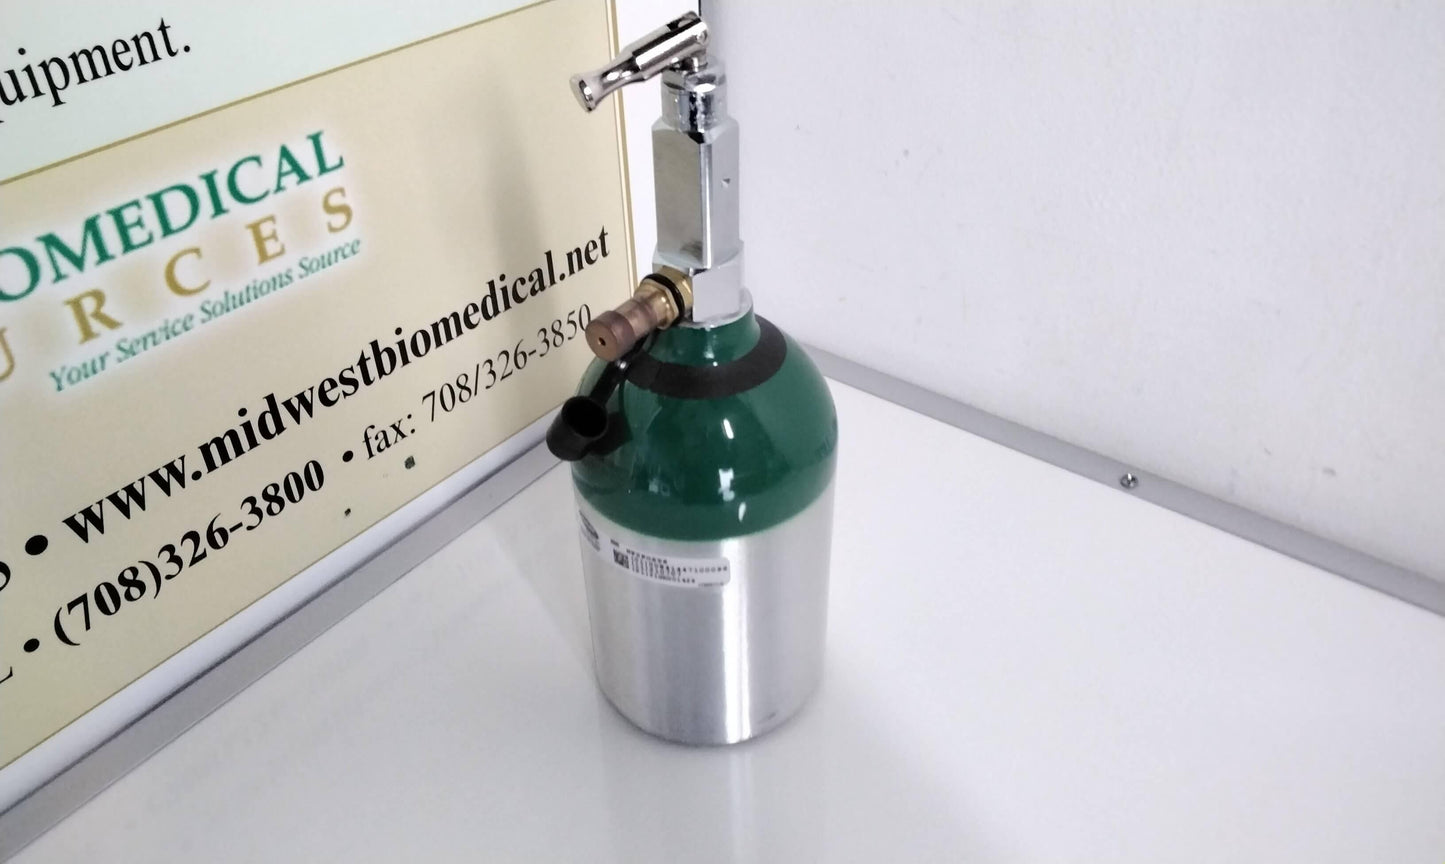 NEW Invacare HomeFill ML6 Post Valve Cylinder Tank HF2POST6 with Free Shipping and Warranty - MBR Medicals